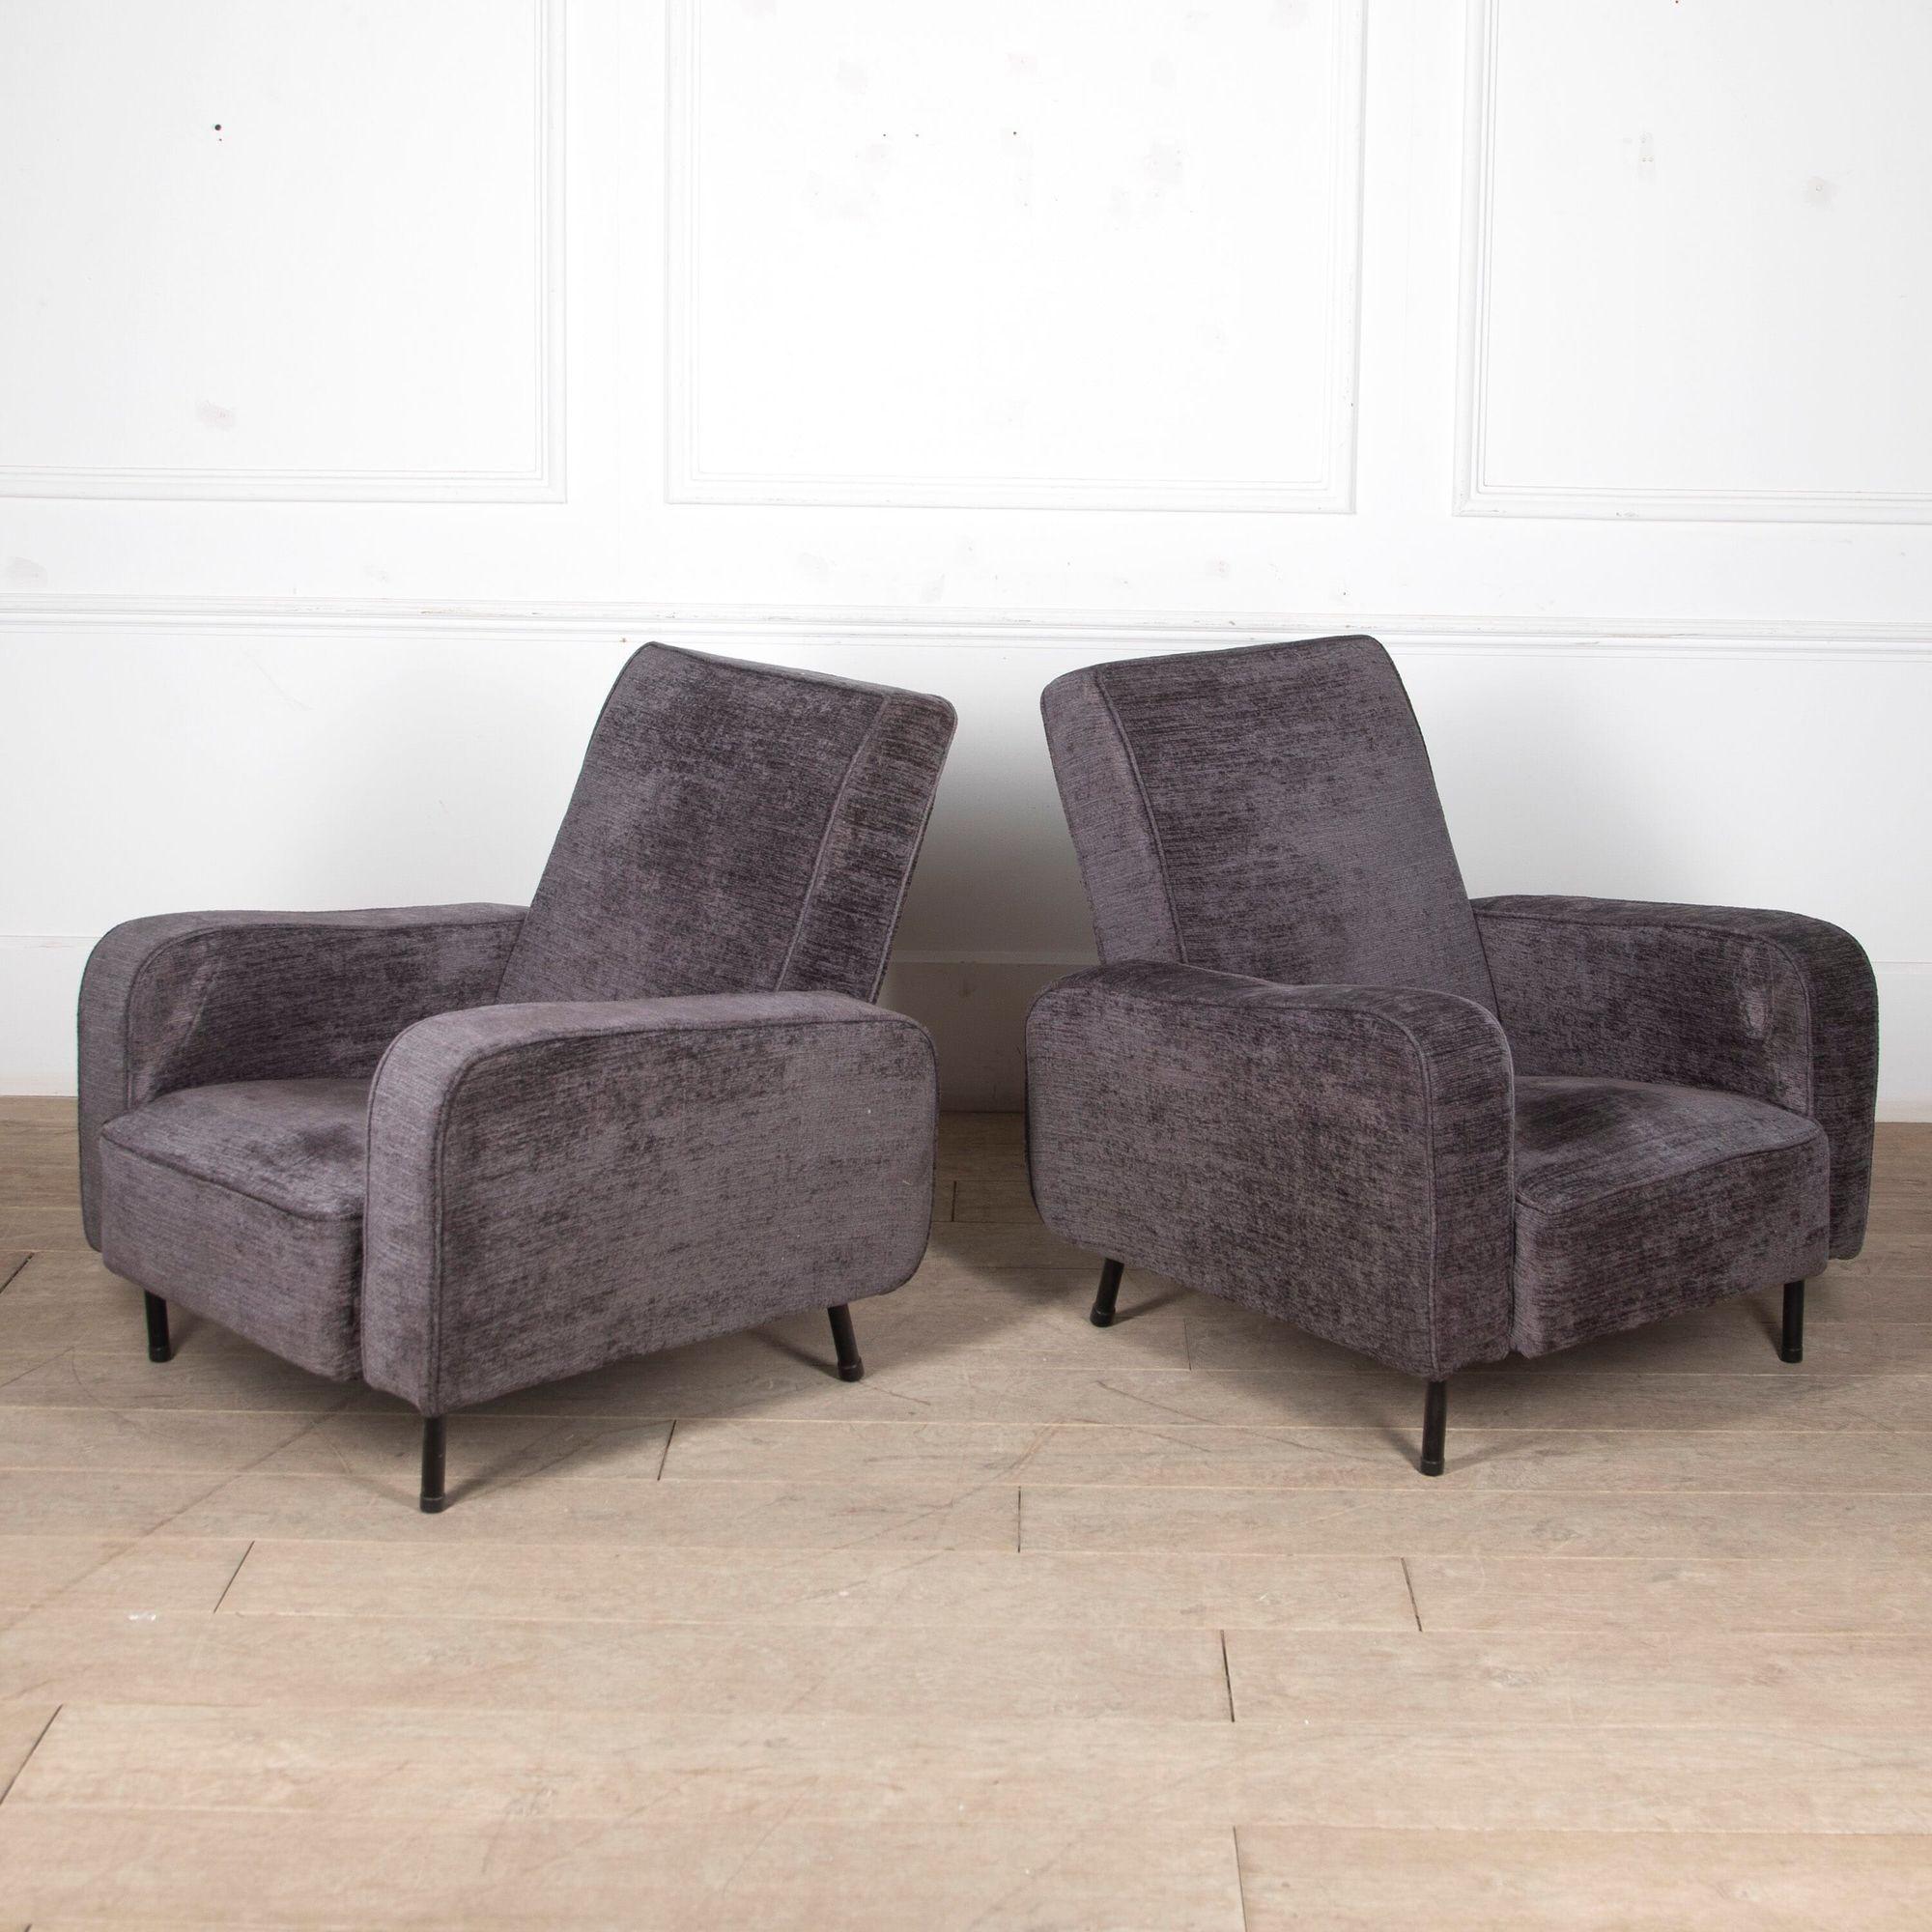 20th Century Pair of Airborne Armchairs Attributed to Pierre Guariche For Sale